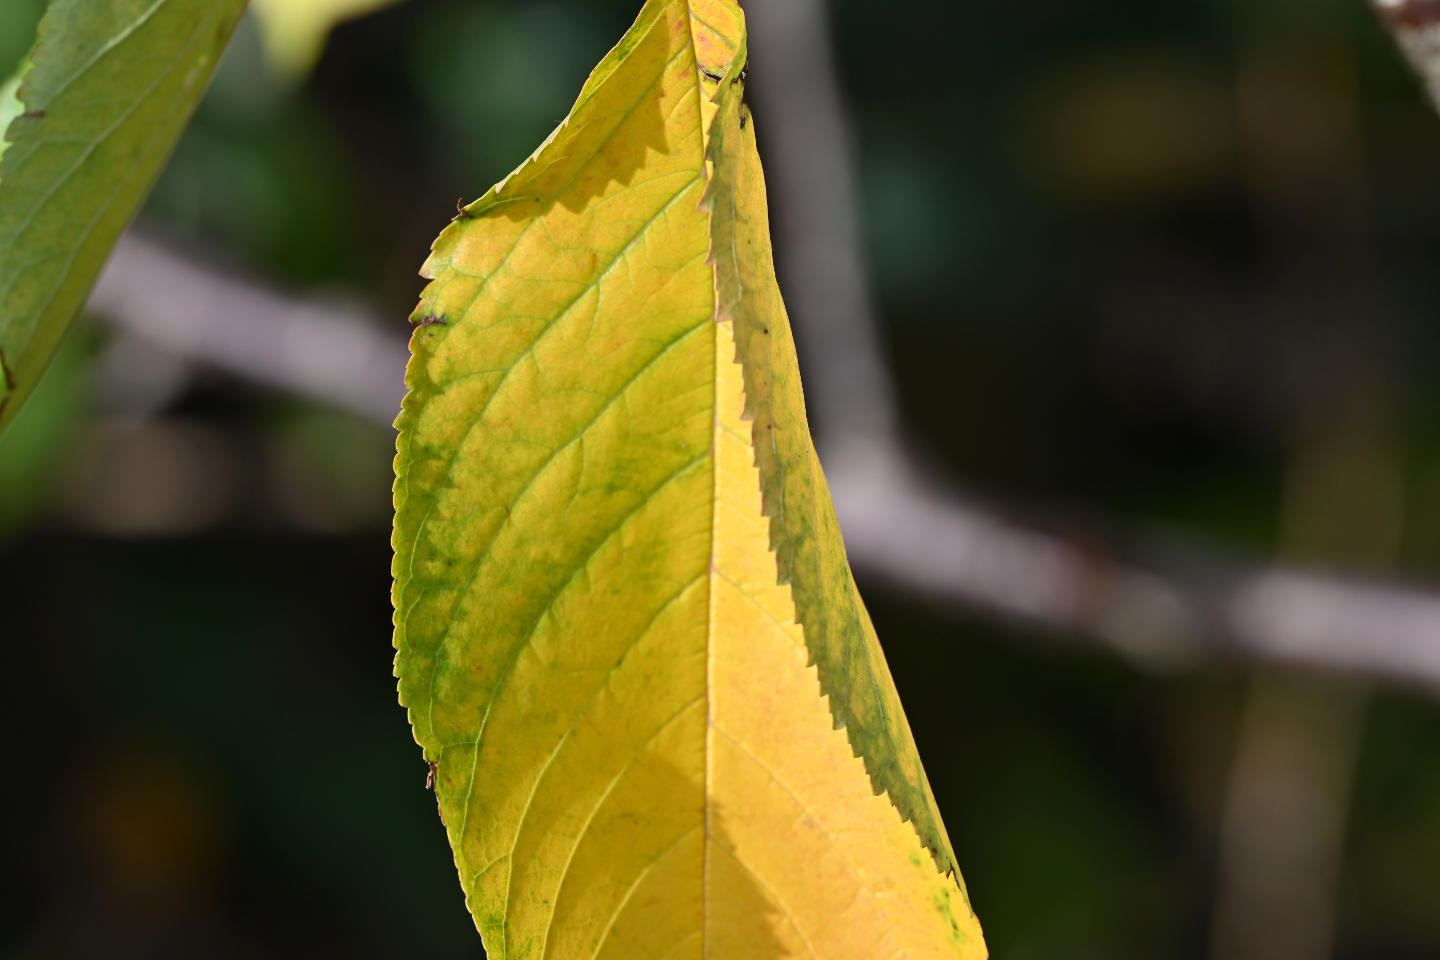 Some lingering green on a cherry leaf